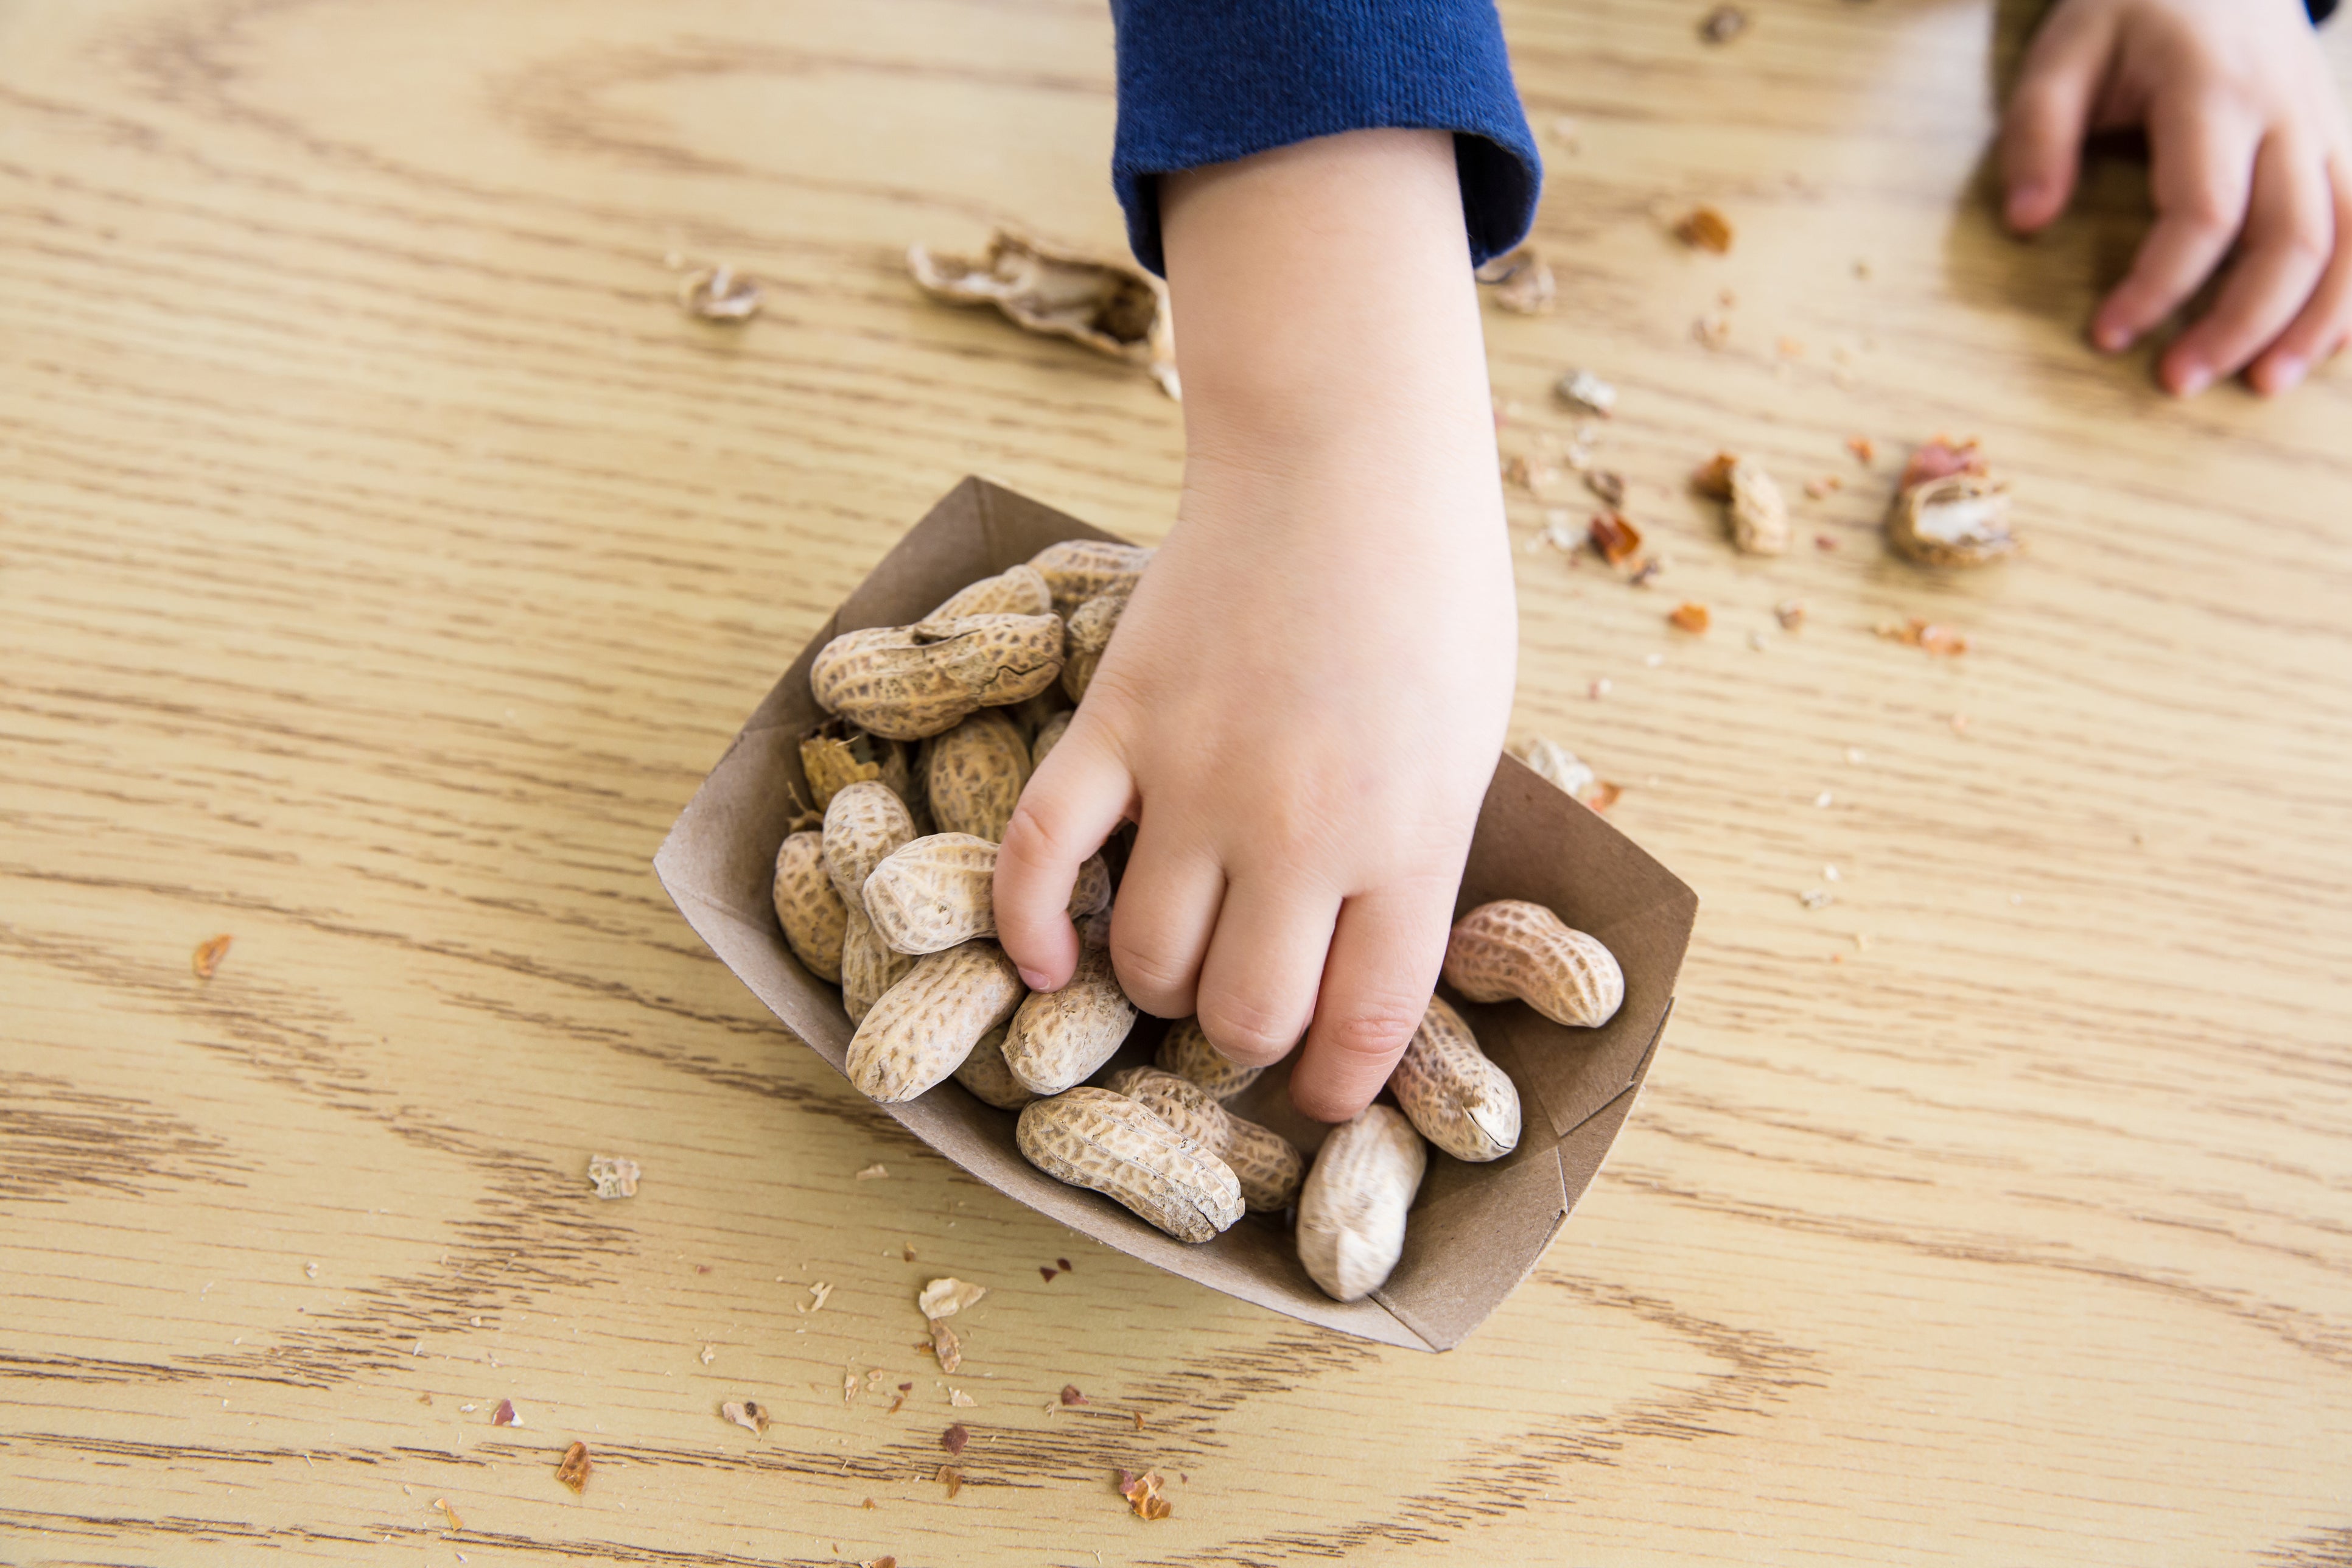 The advice on exposing young children to peanuts has changed in recent years